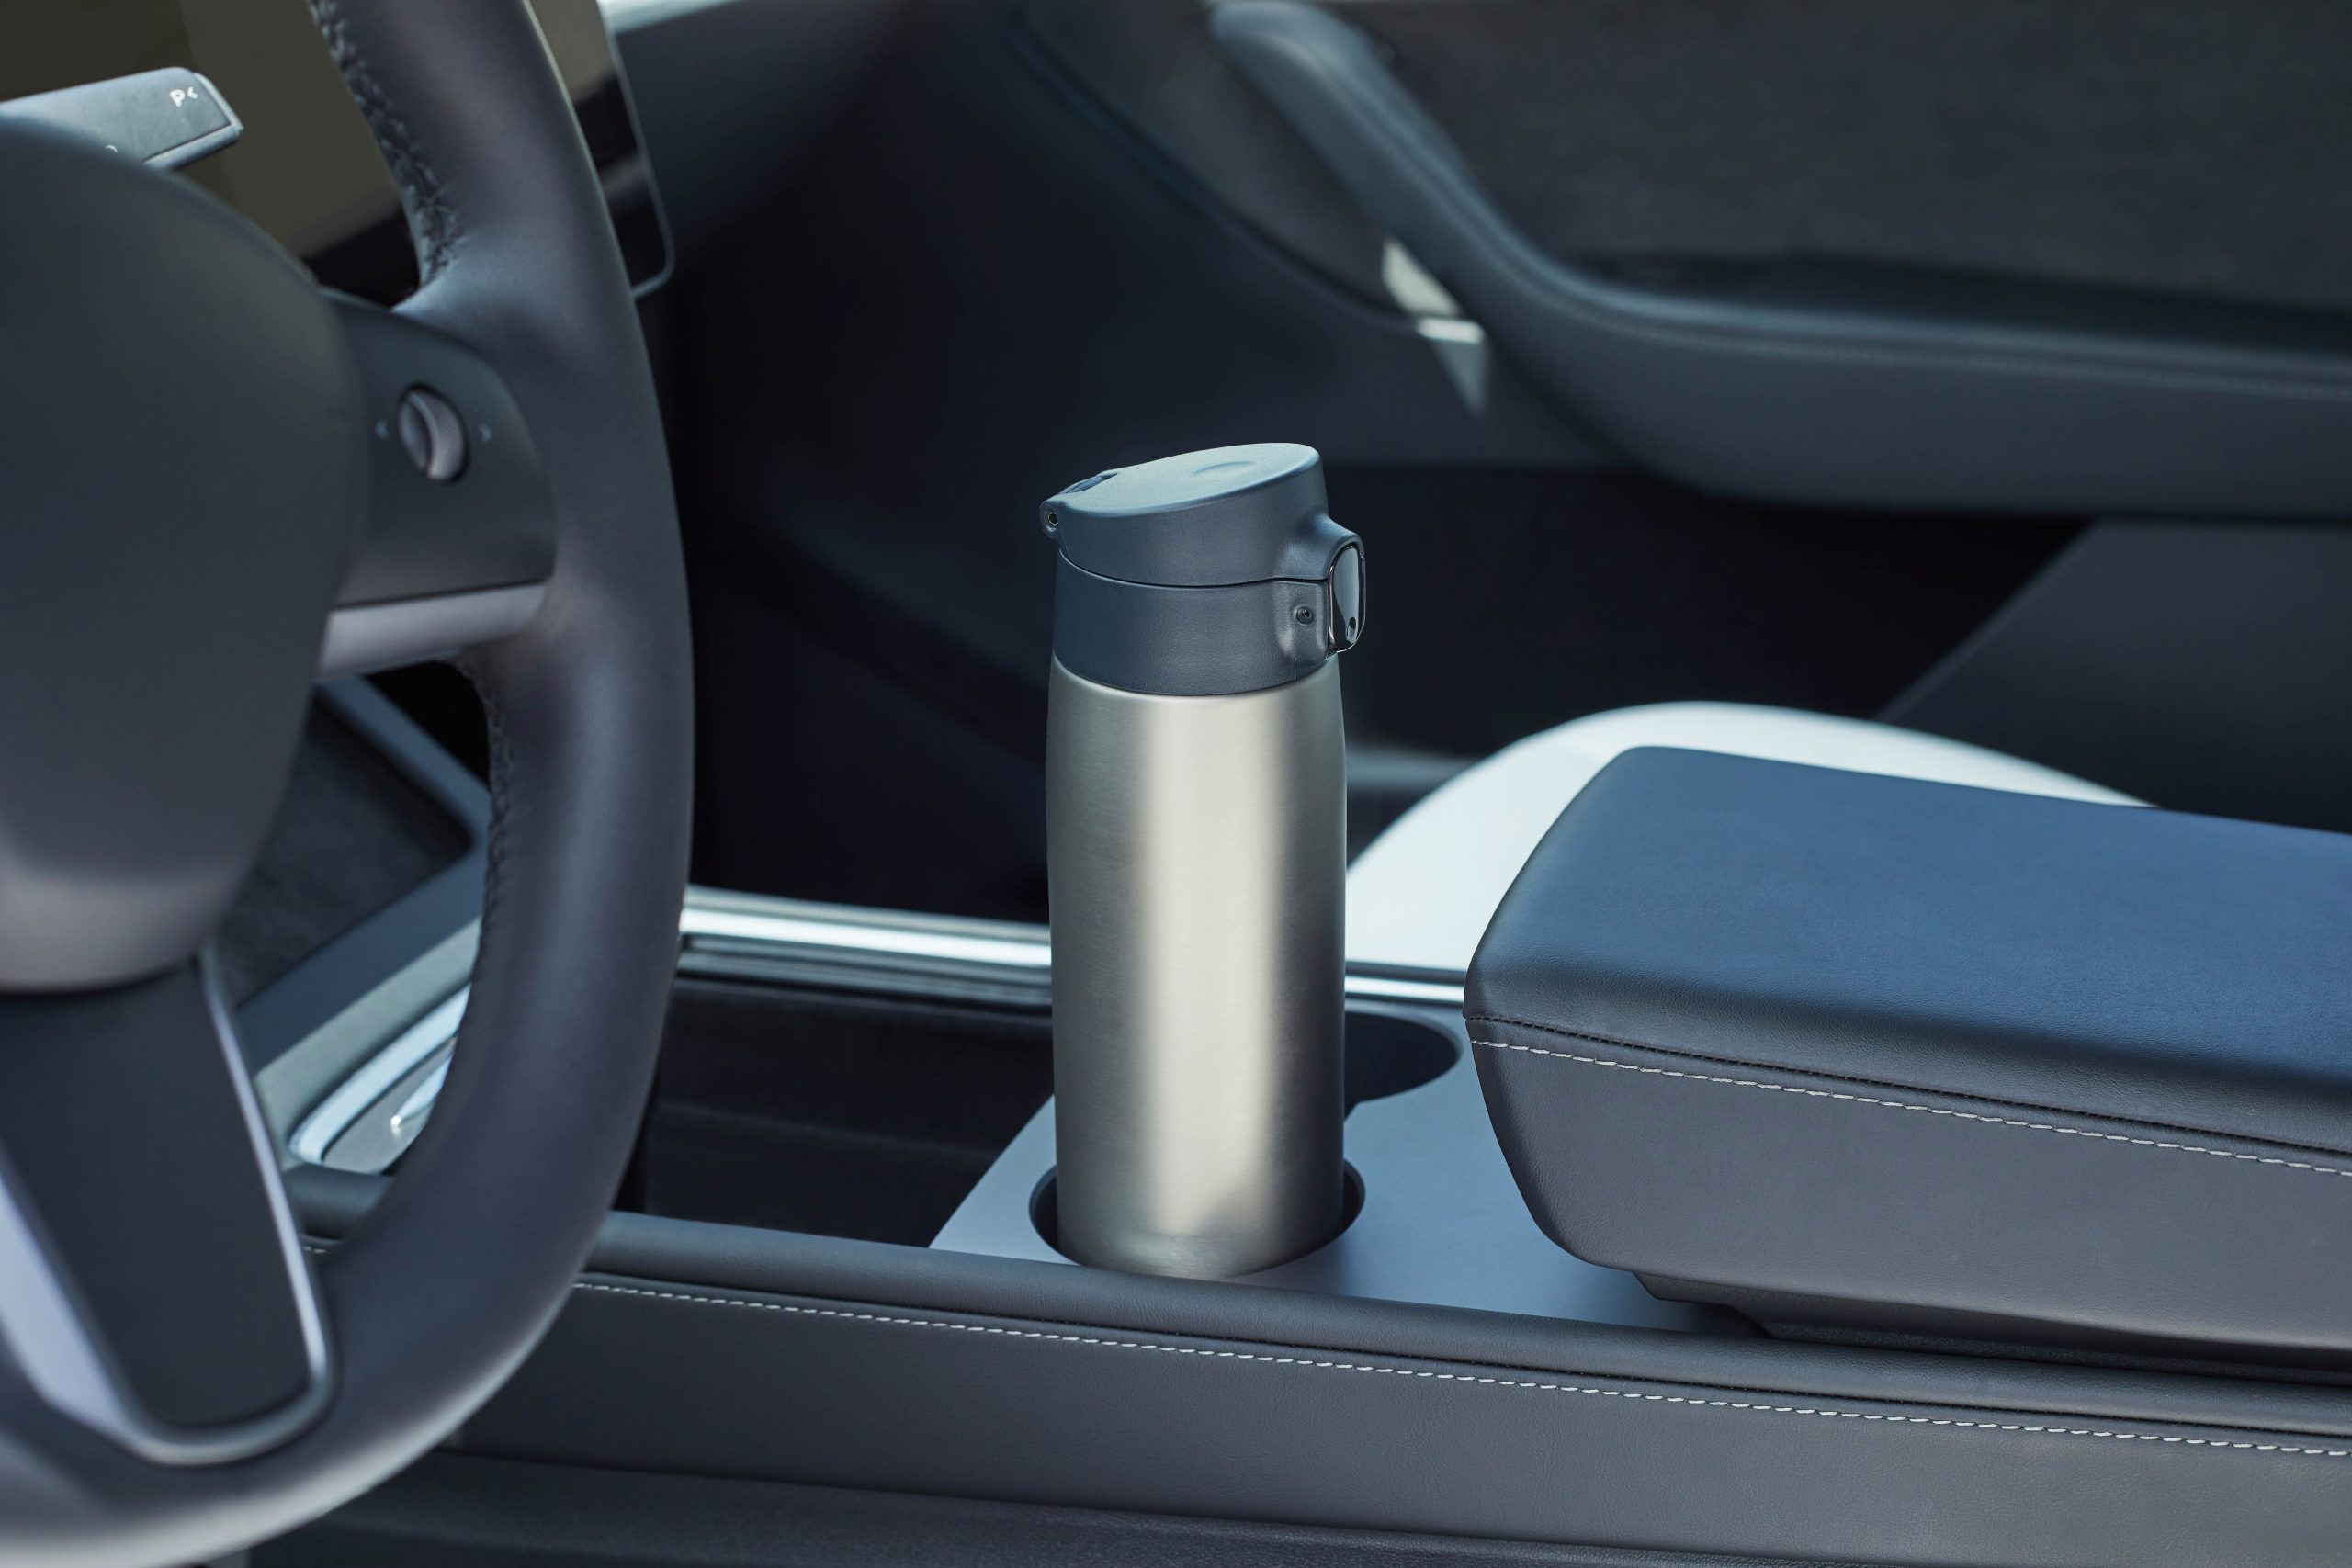 Car interior in dark colors with a stainless steel mug in the cup holder